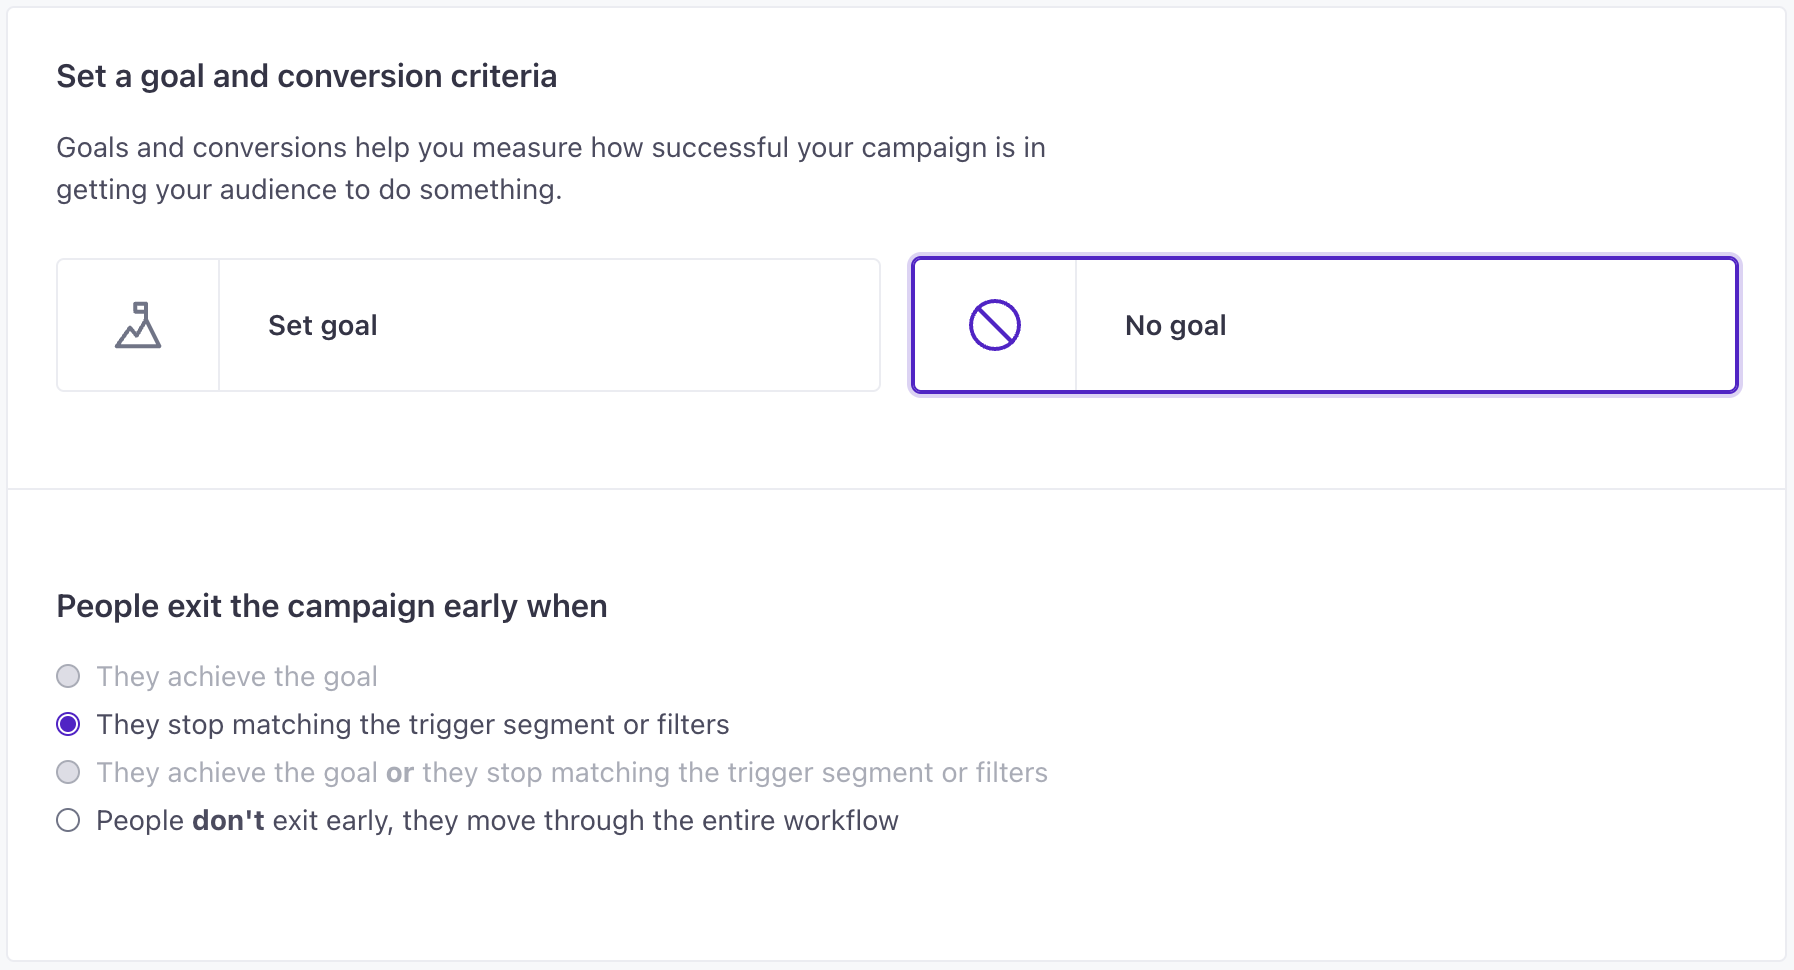 People exit the campaign early when they stop matching the trigger segment or filters.